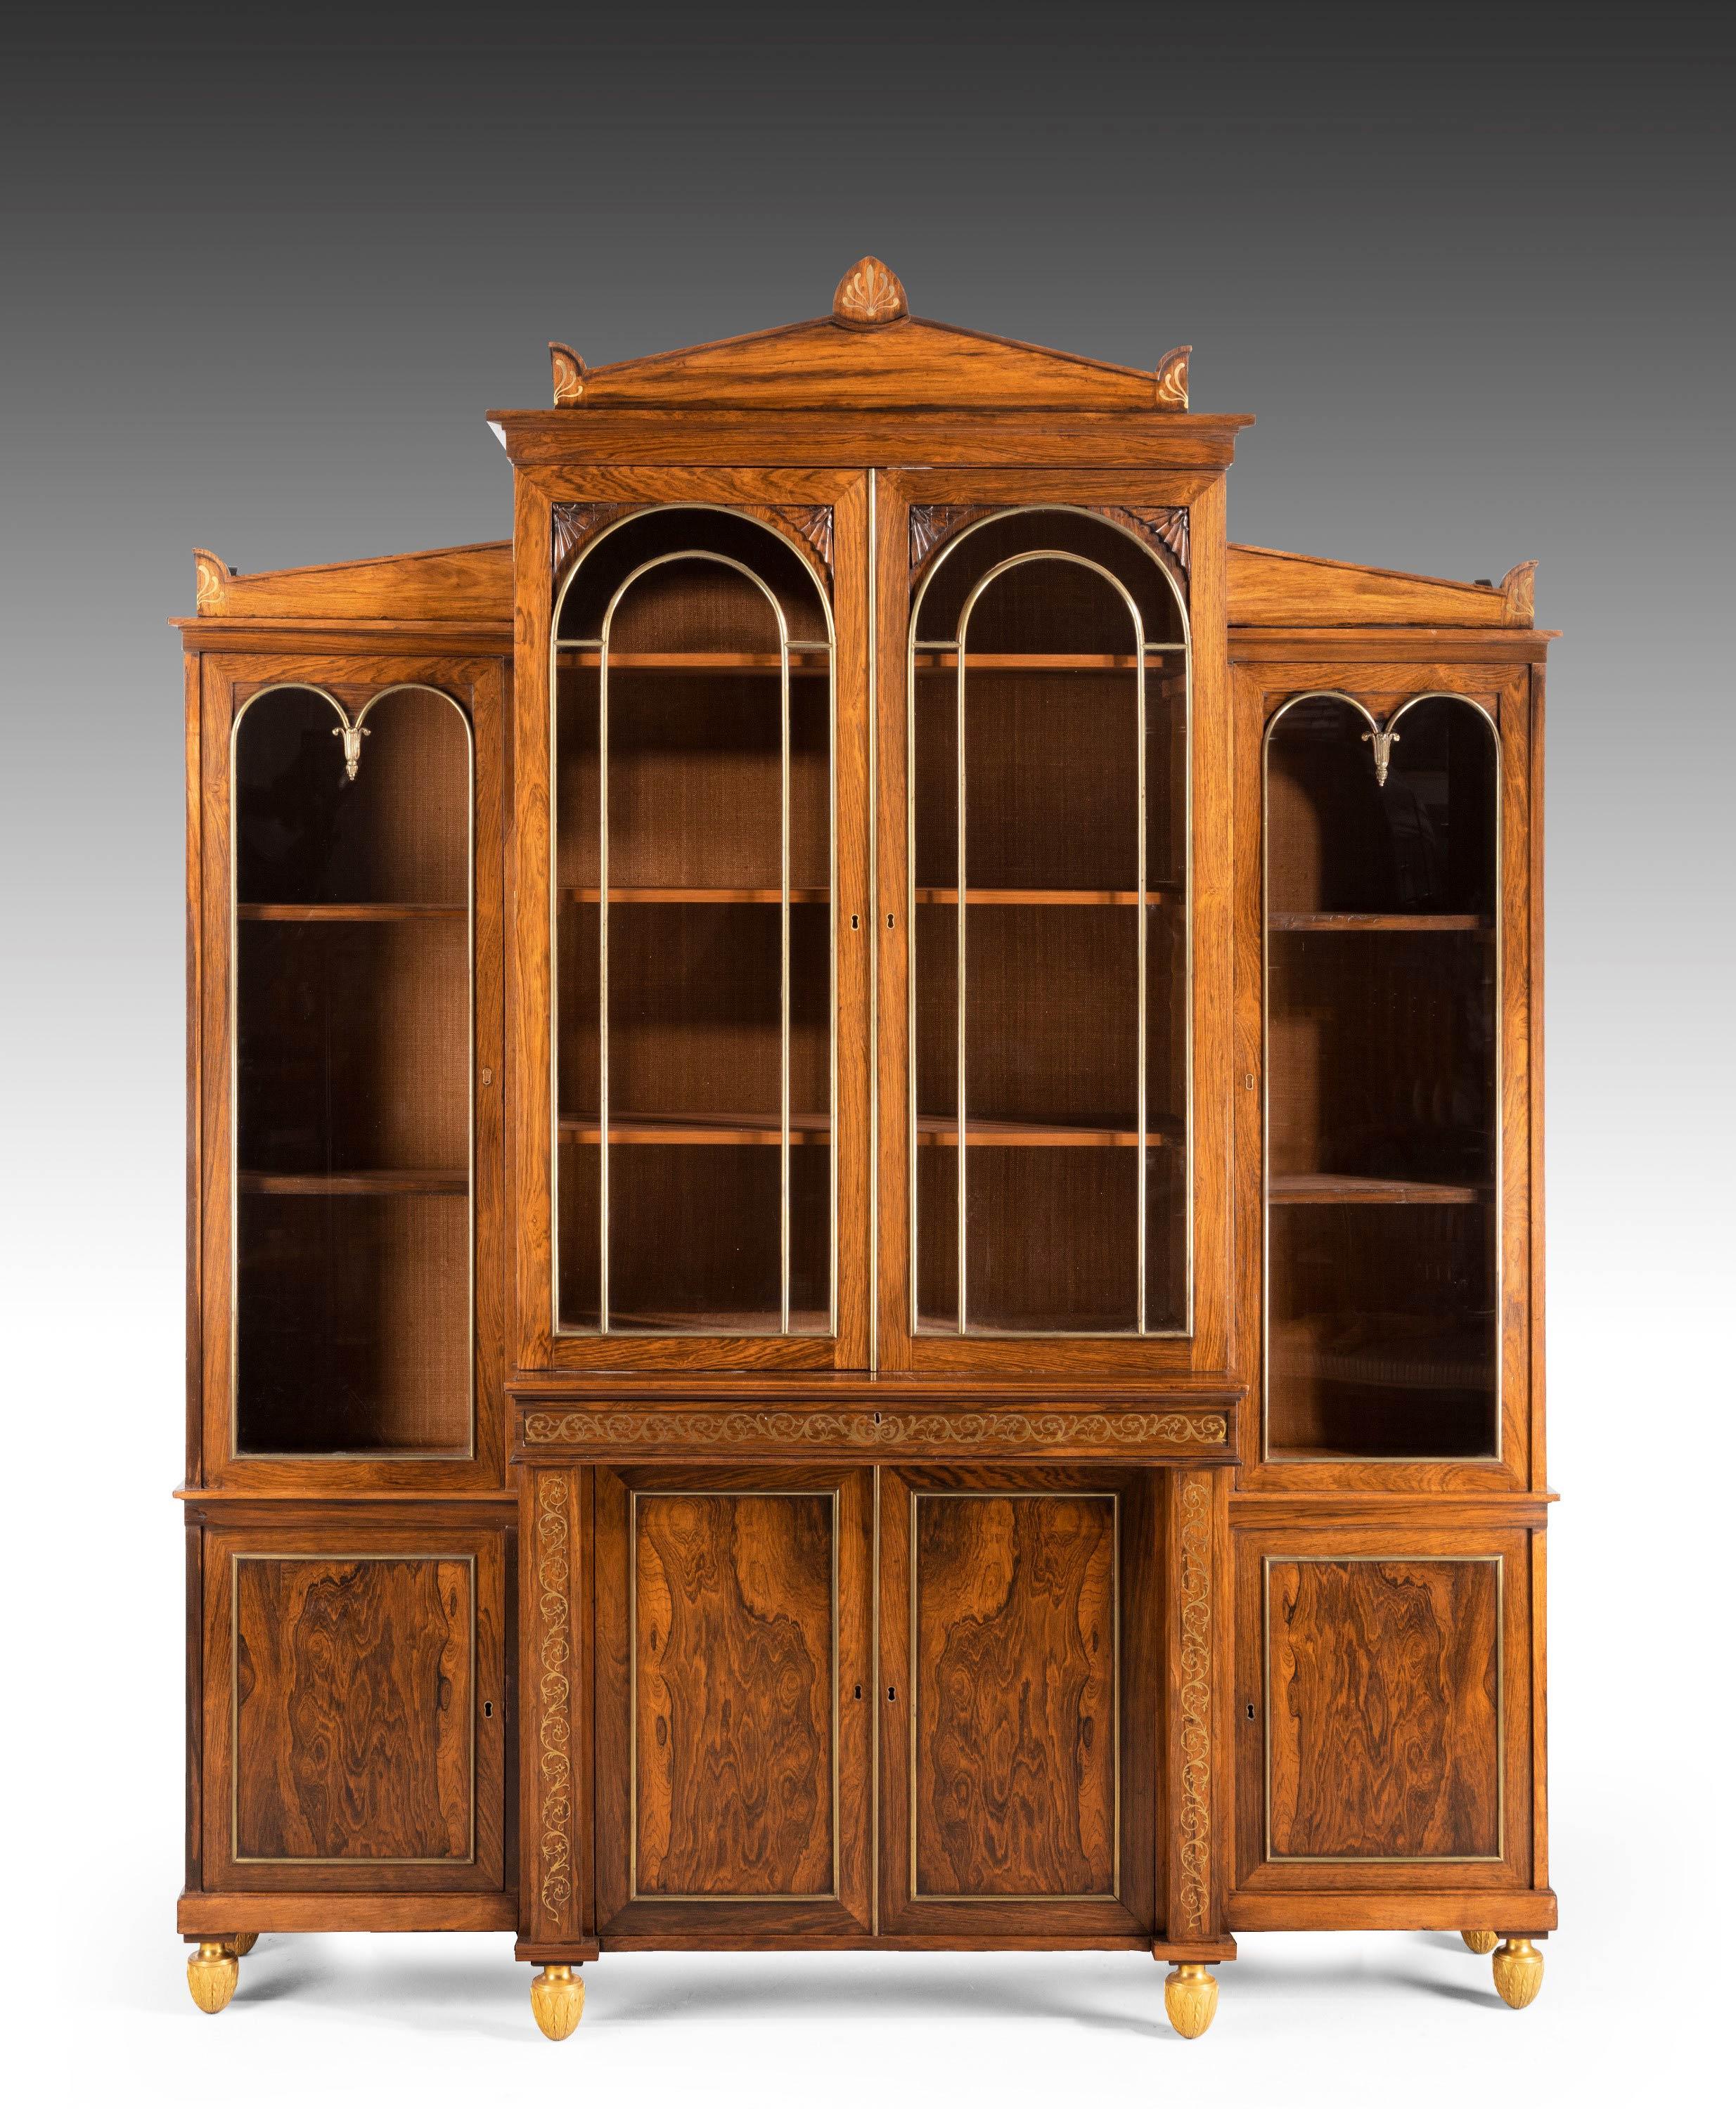 English Regency Period Rosewood Bookcase / China Cabinet For Sale